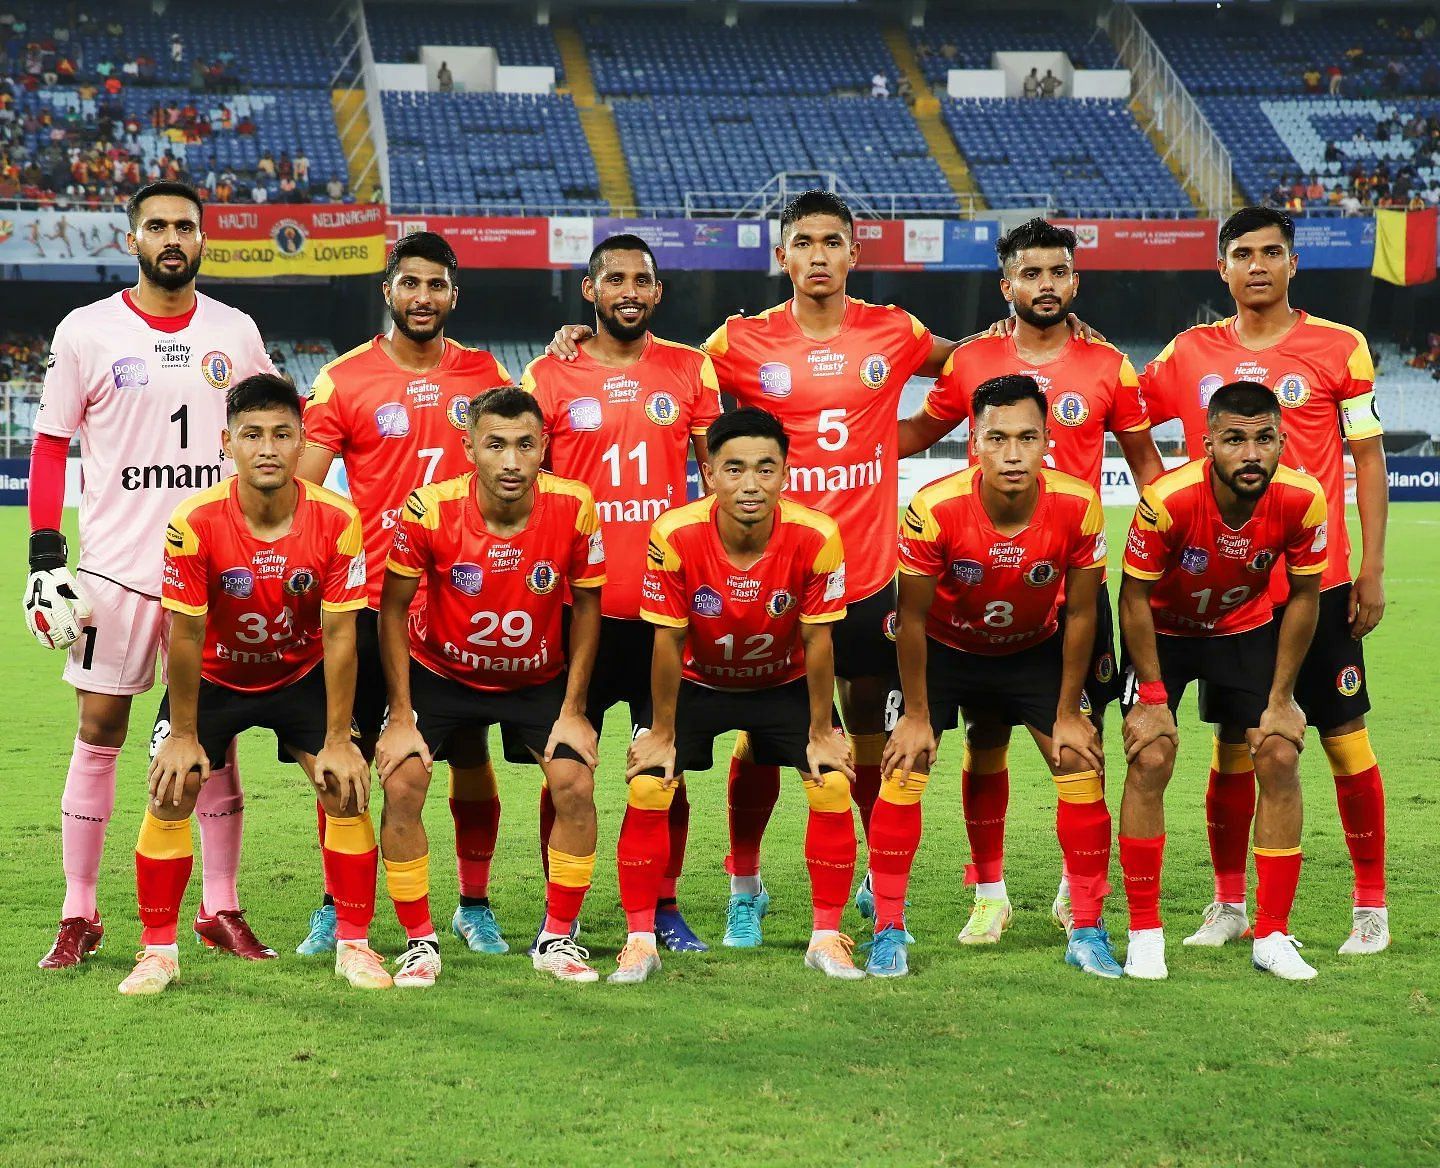 East Bengal FC have secured two draws in the Durand Cup so far.